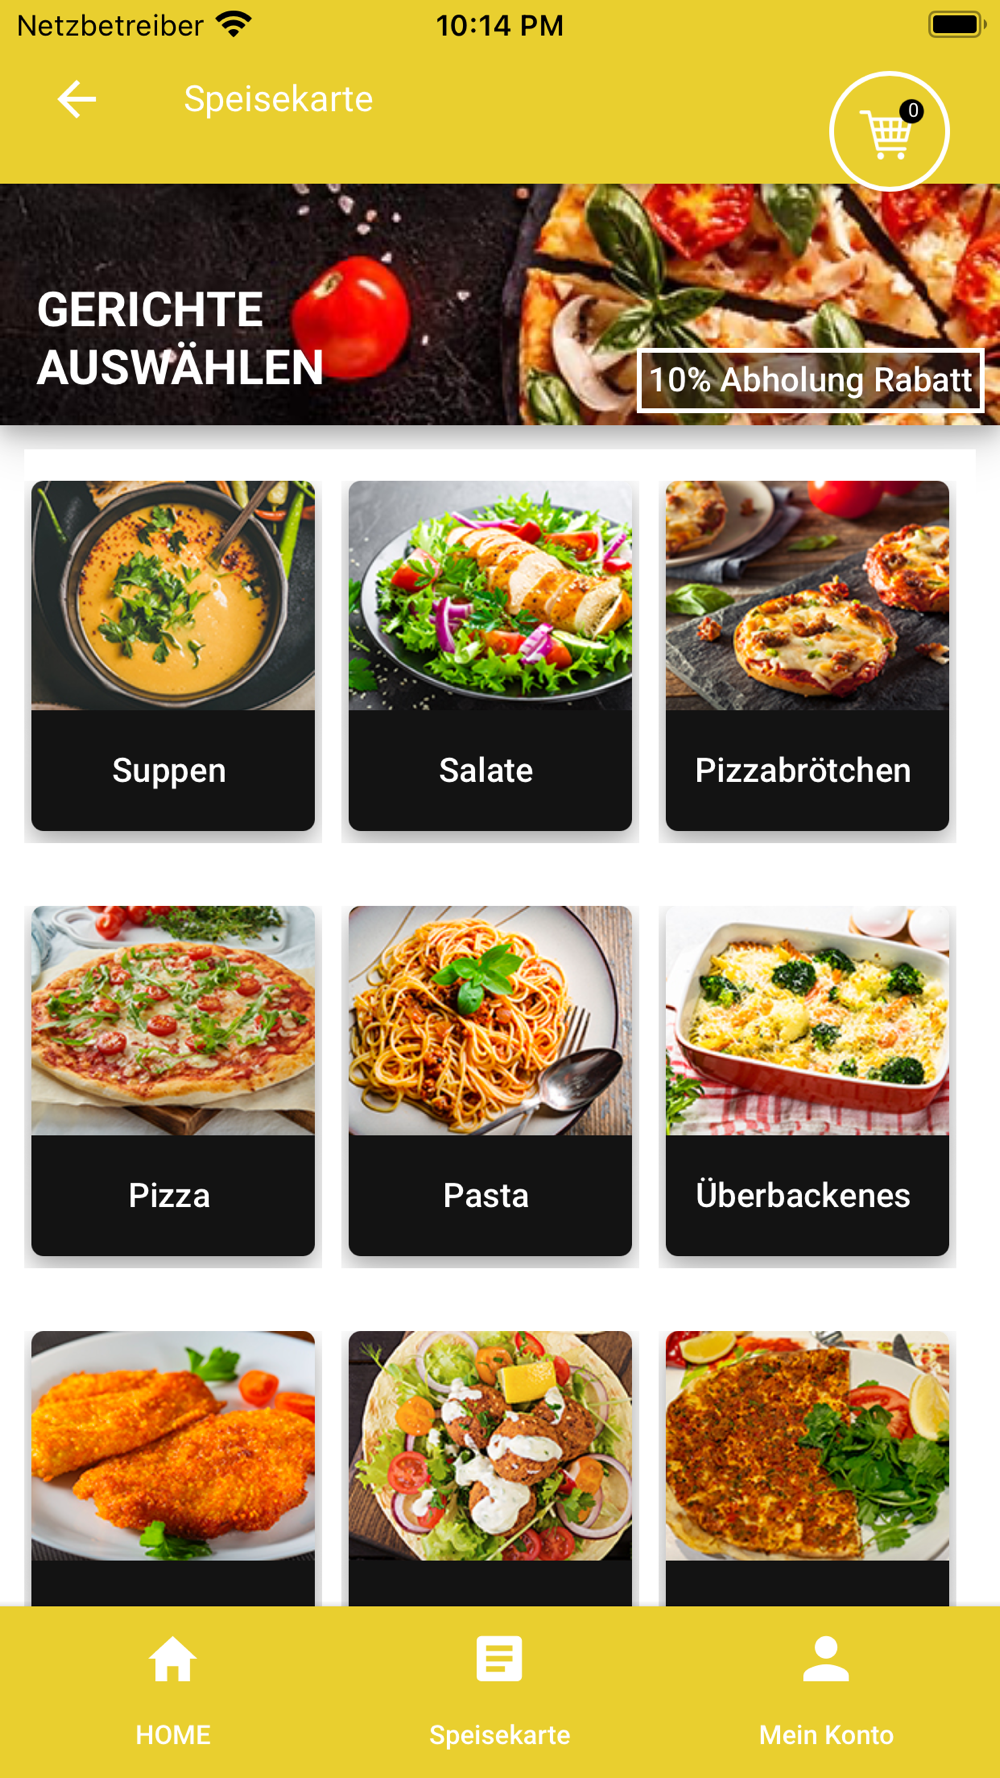 Berlin Grill und Pizzeria Free Download App for iPhone - STEPrimo.com